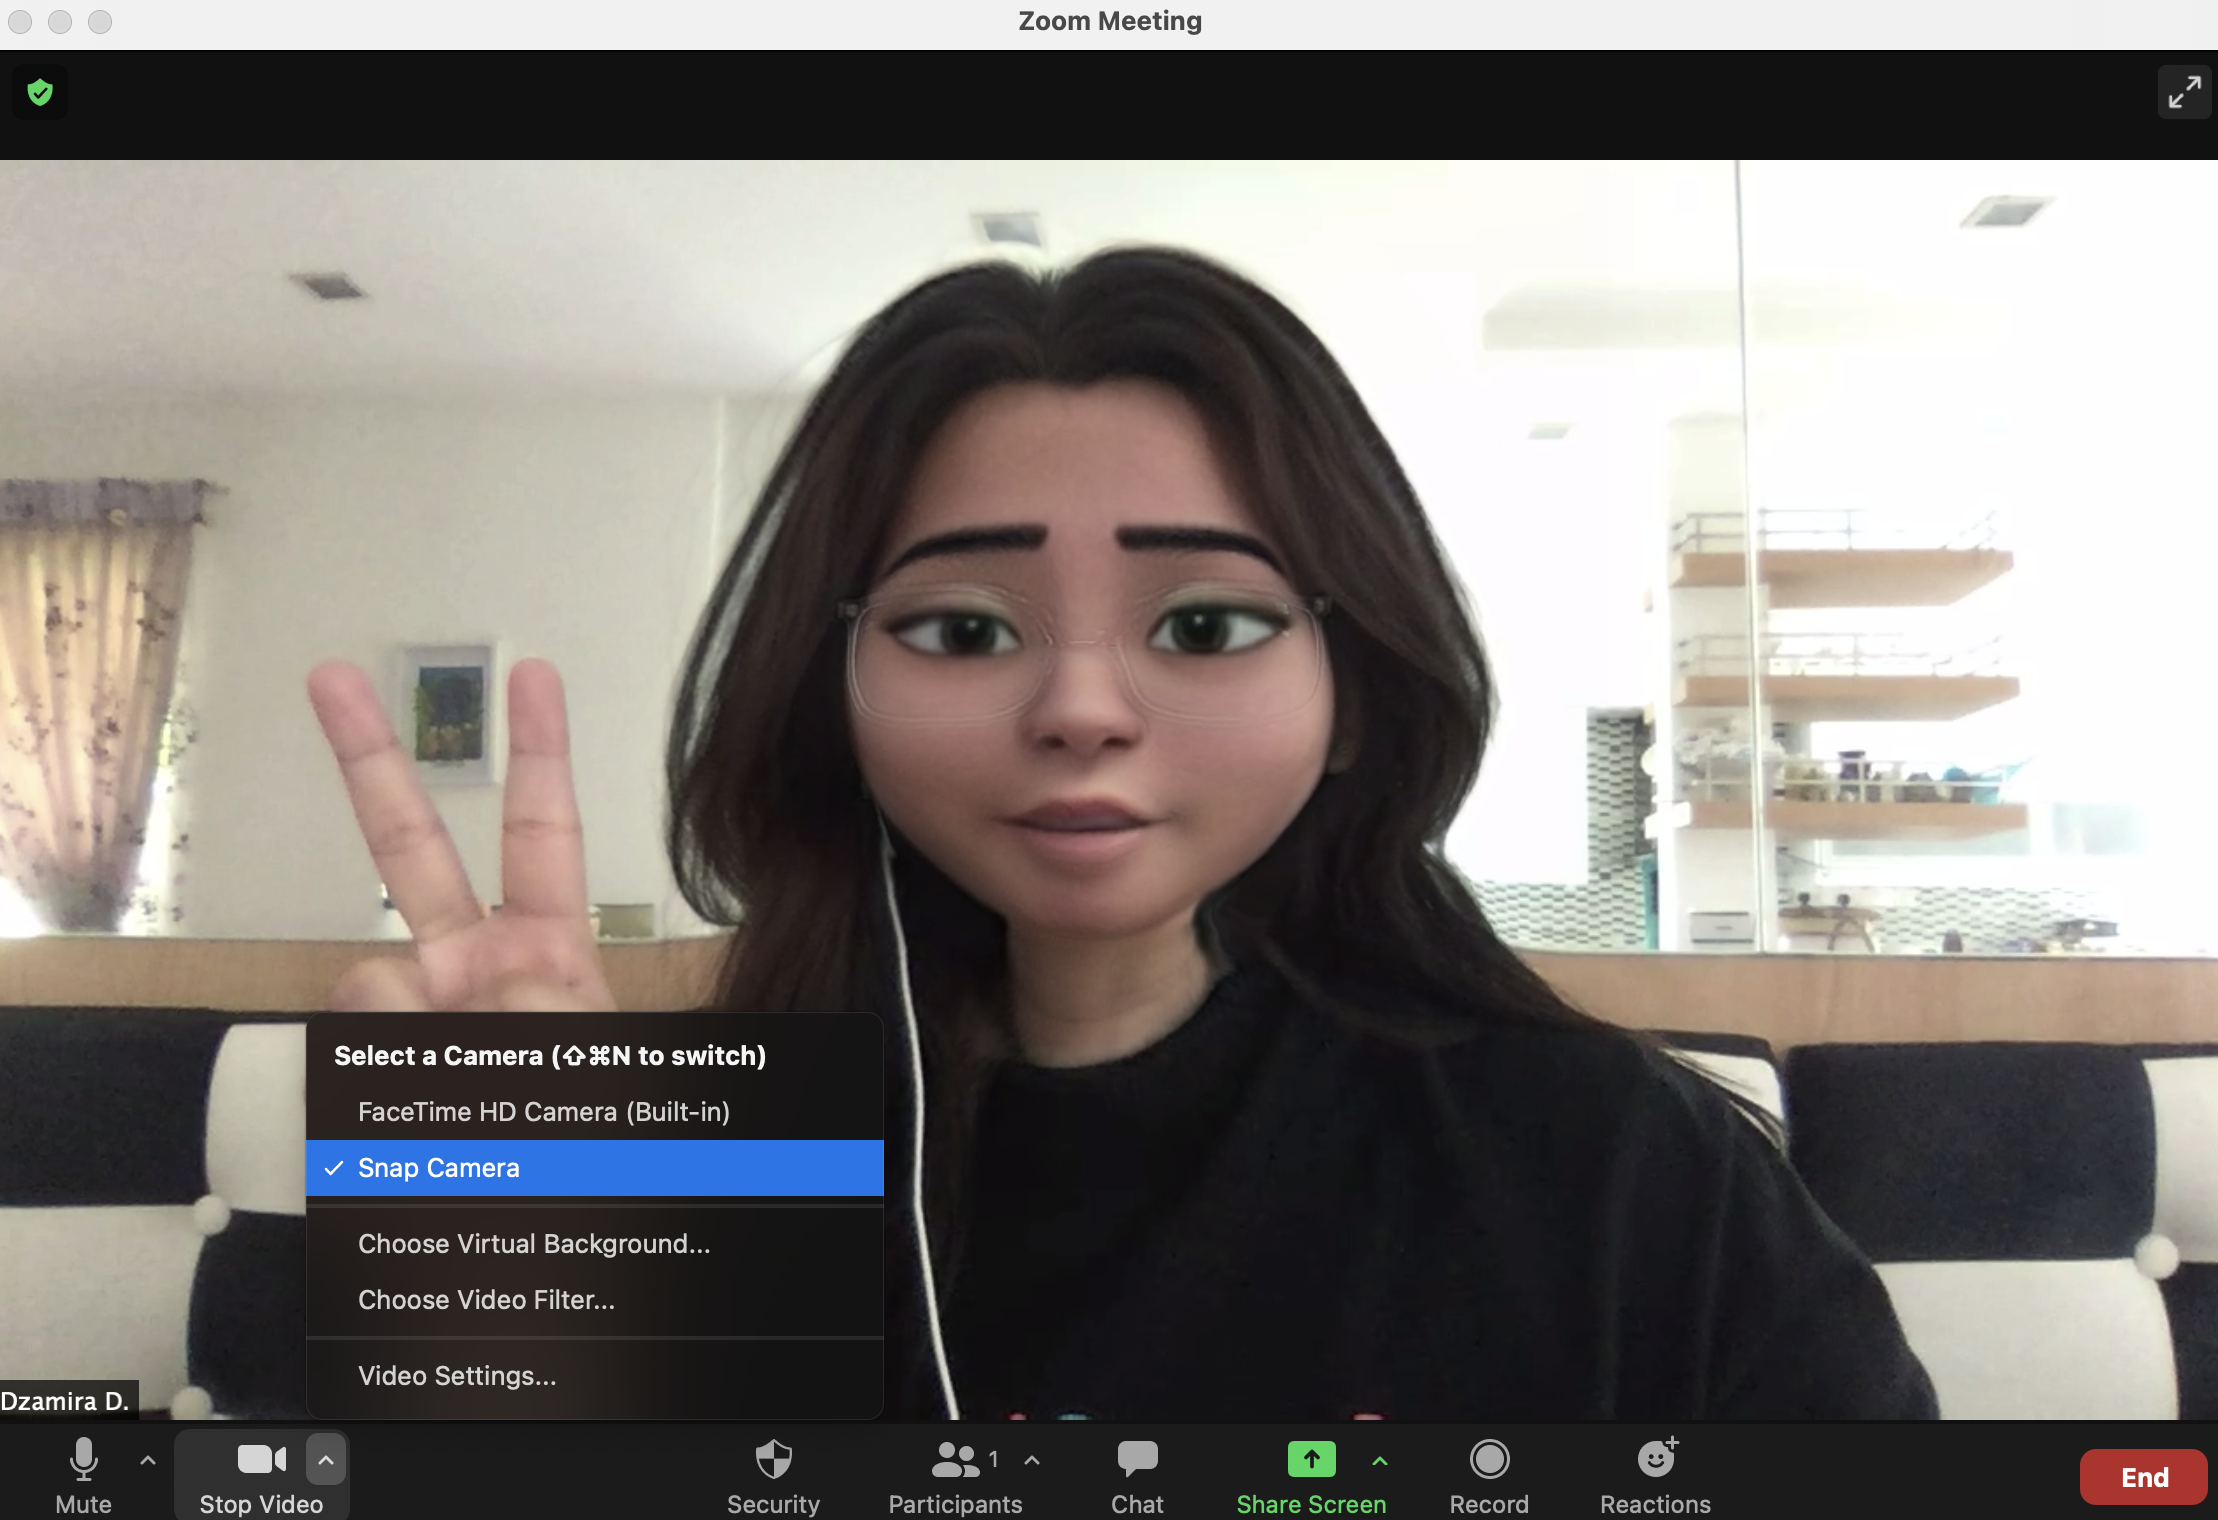 You can use Snap Camera to turn yourself into a Disney Princess in your  next Zoom meeting - SoyaCincau